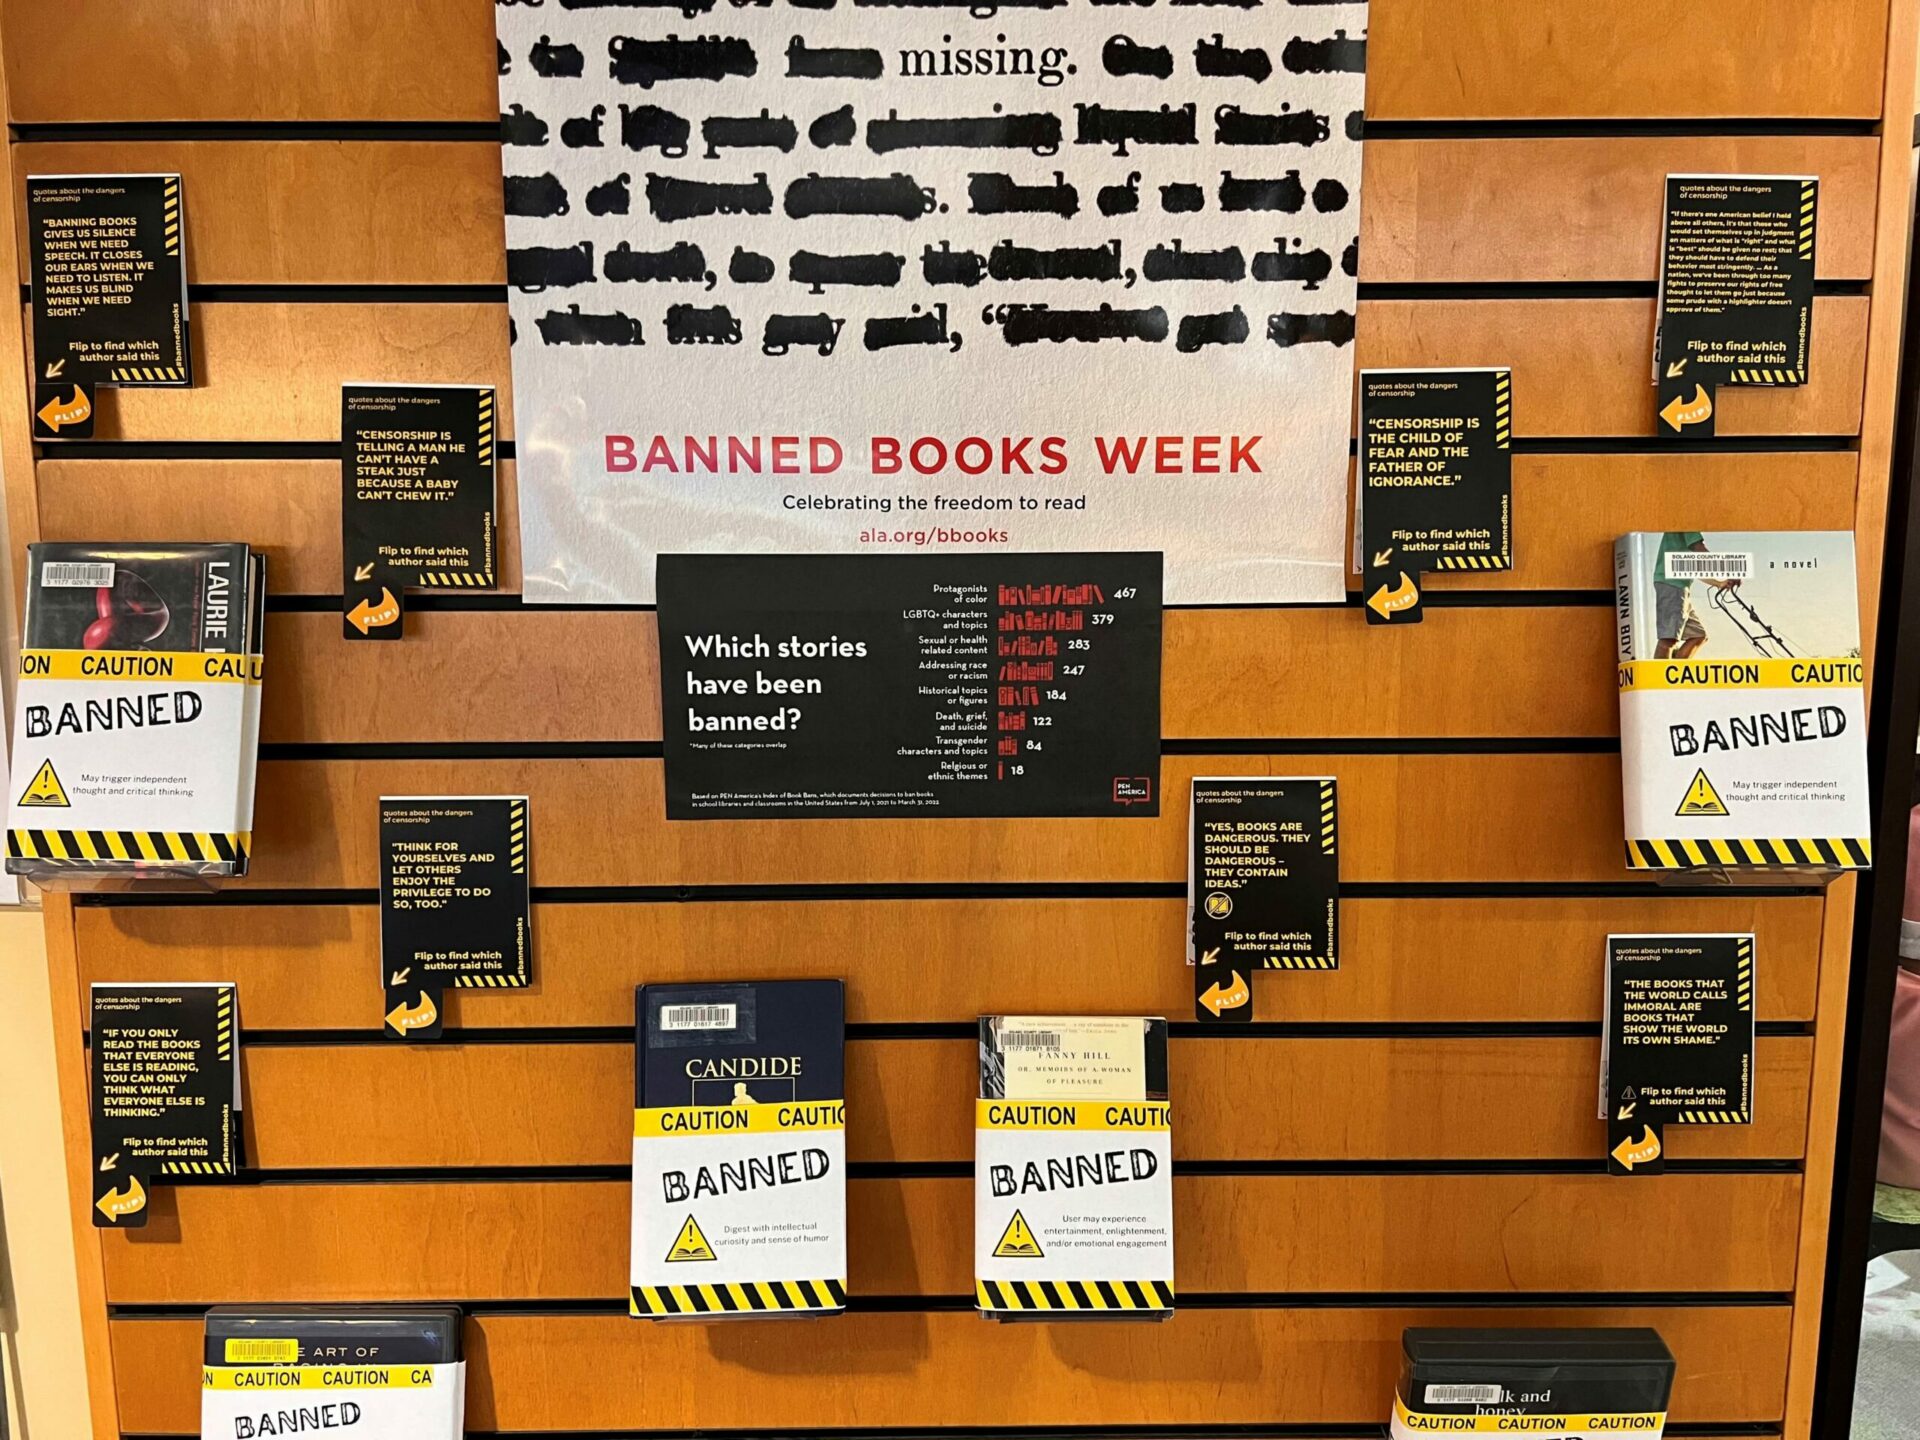 Checkout this banned books display at the Fairfield Civic Center Library!